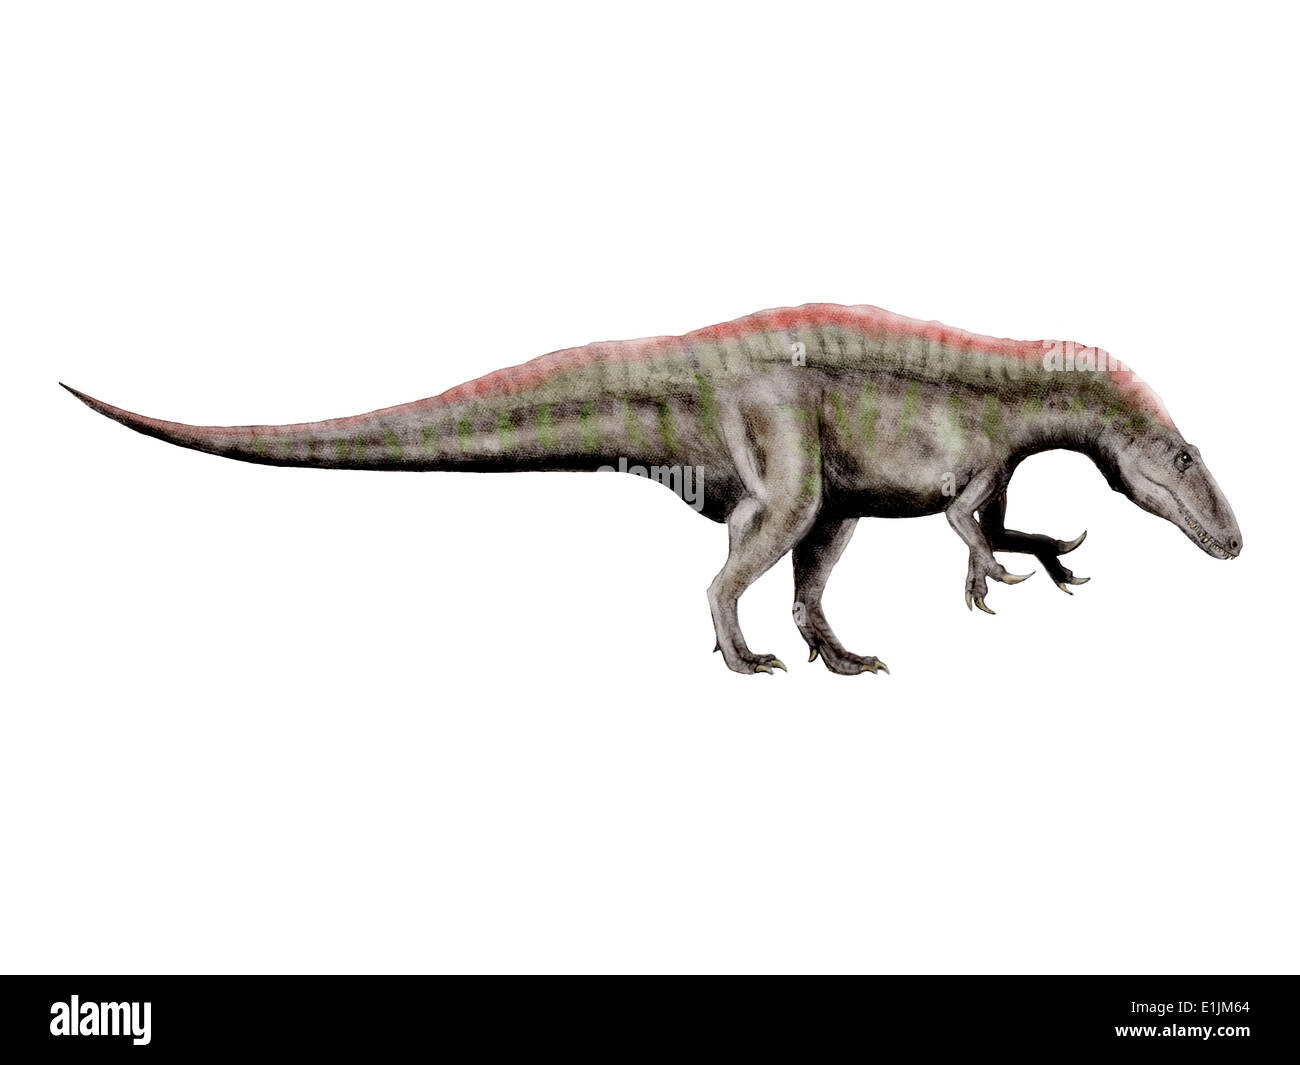 Acrocanthosaurus, a theropod dinosaur from the Early Cretaceous Period. Stock Photo